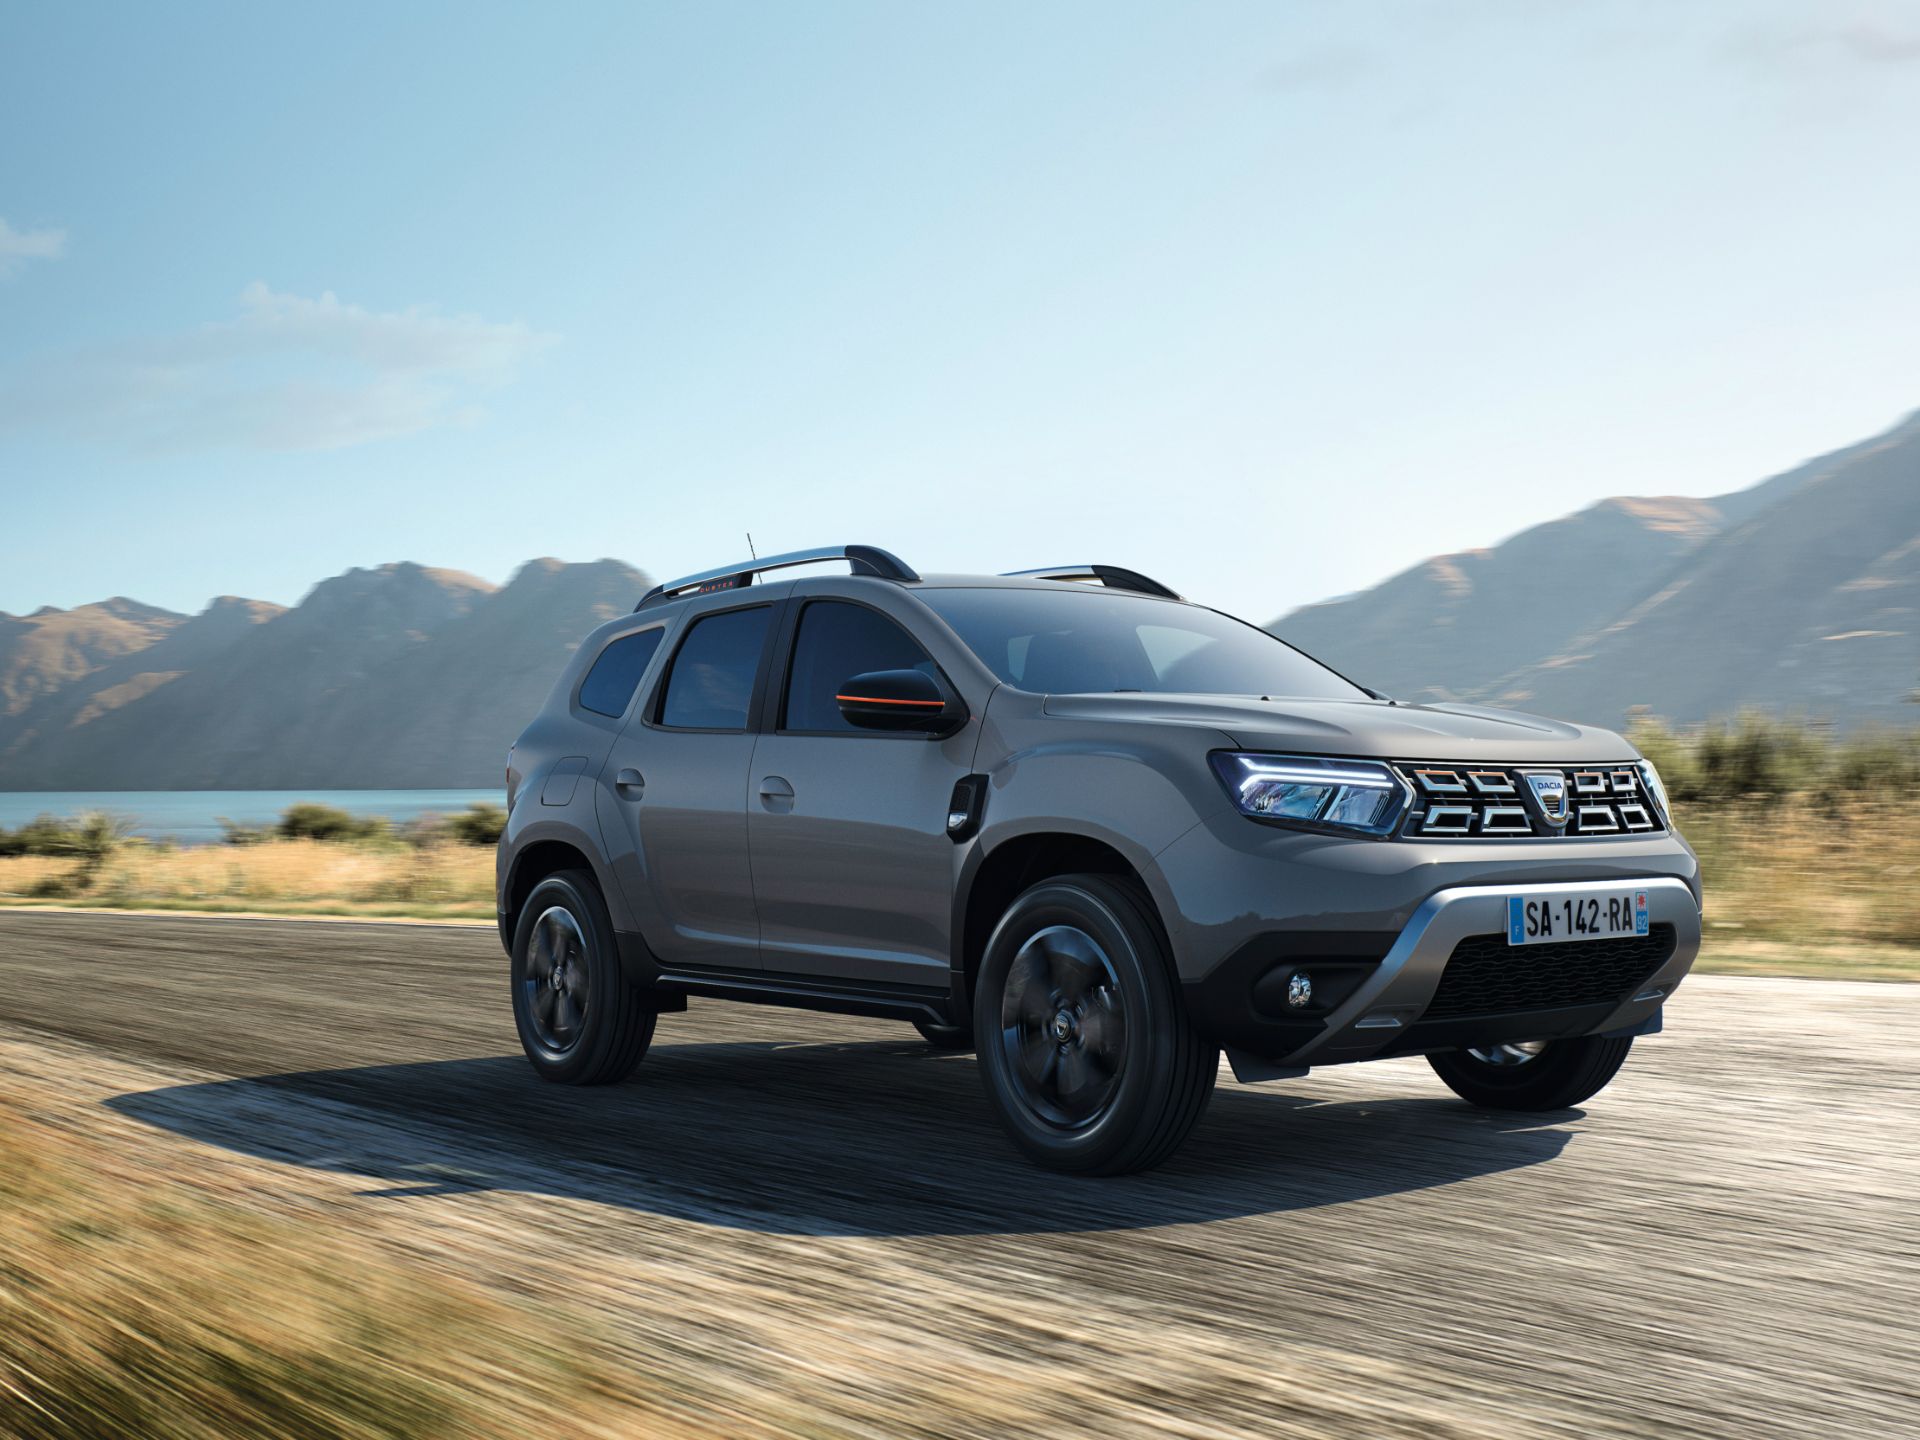 Dacia Duster Extreme Limited Edition resim galerisi (30.08.2021)